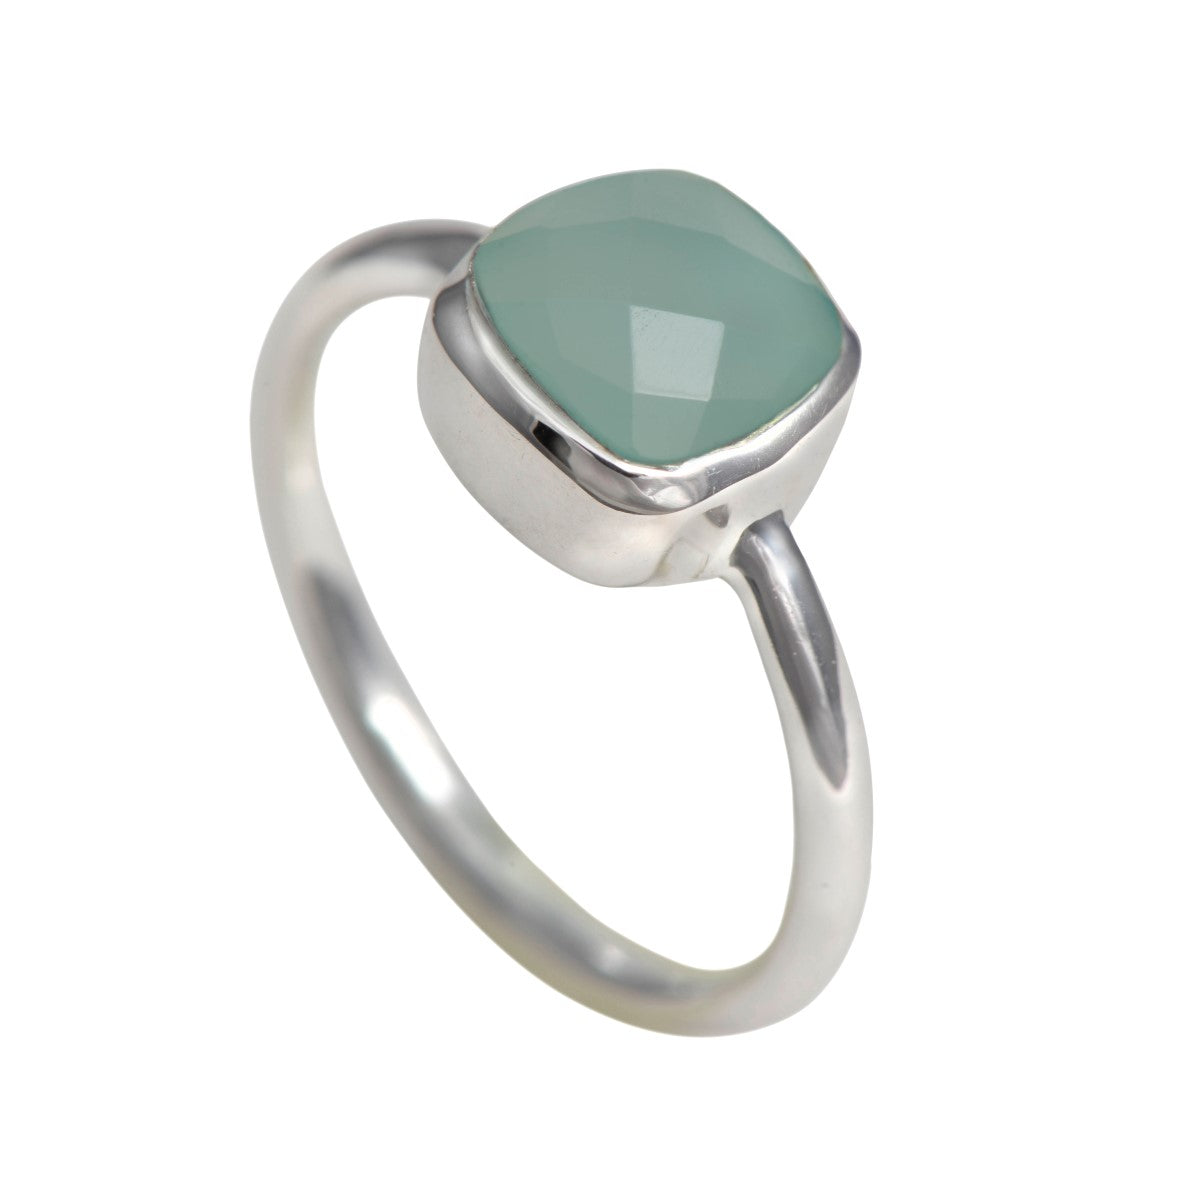 Faceted Square Cut Natural Gemstone Sterling Silver Solitaire Ring - Aqua Chalcedony